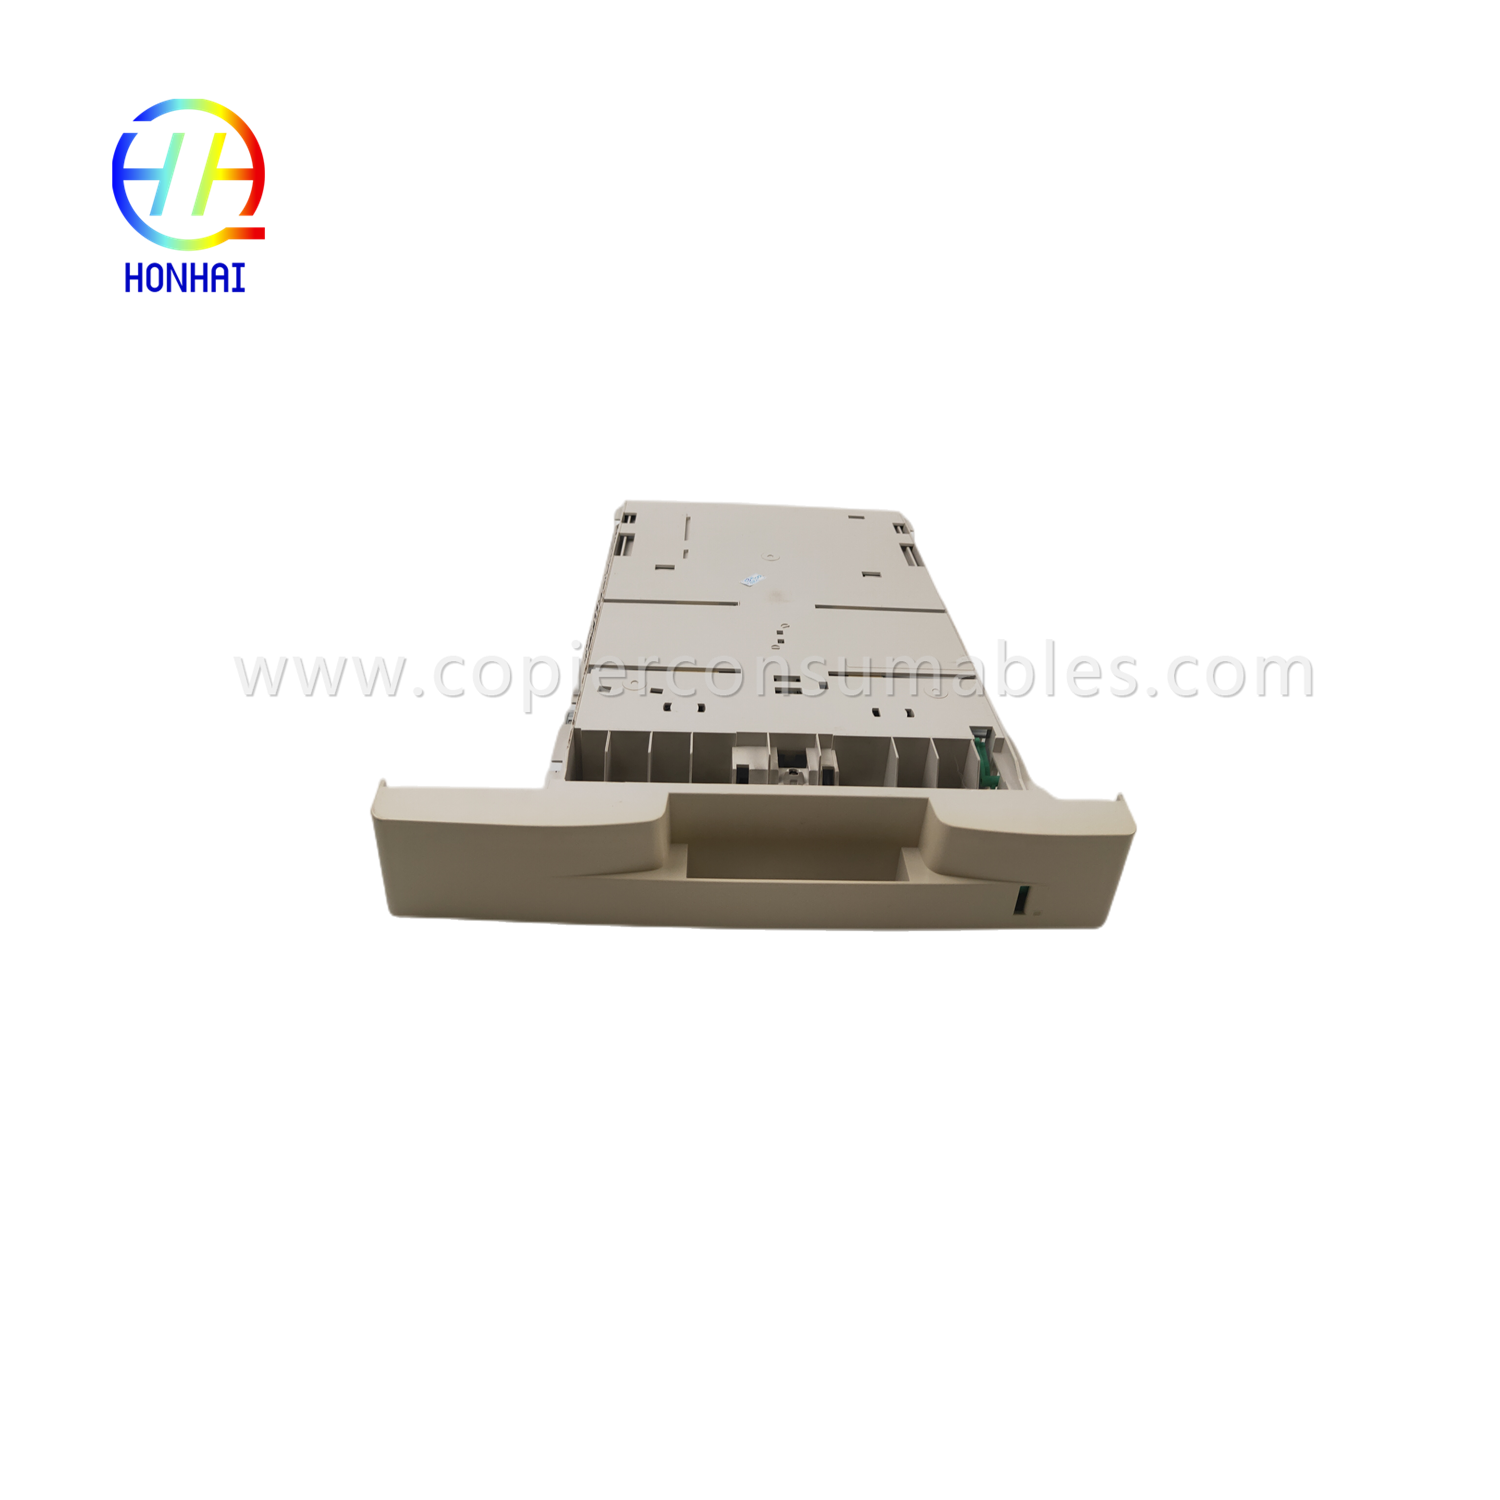 https://www.copierconsumables.com/cassette-paper-tray-for-xerox-050n00650-phaser-3320dni3315dn-3325dni-product/